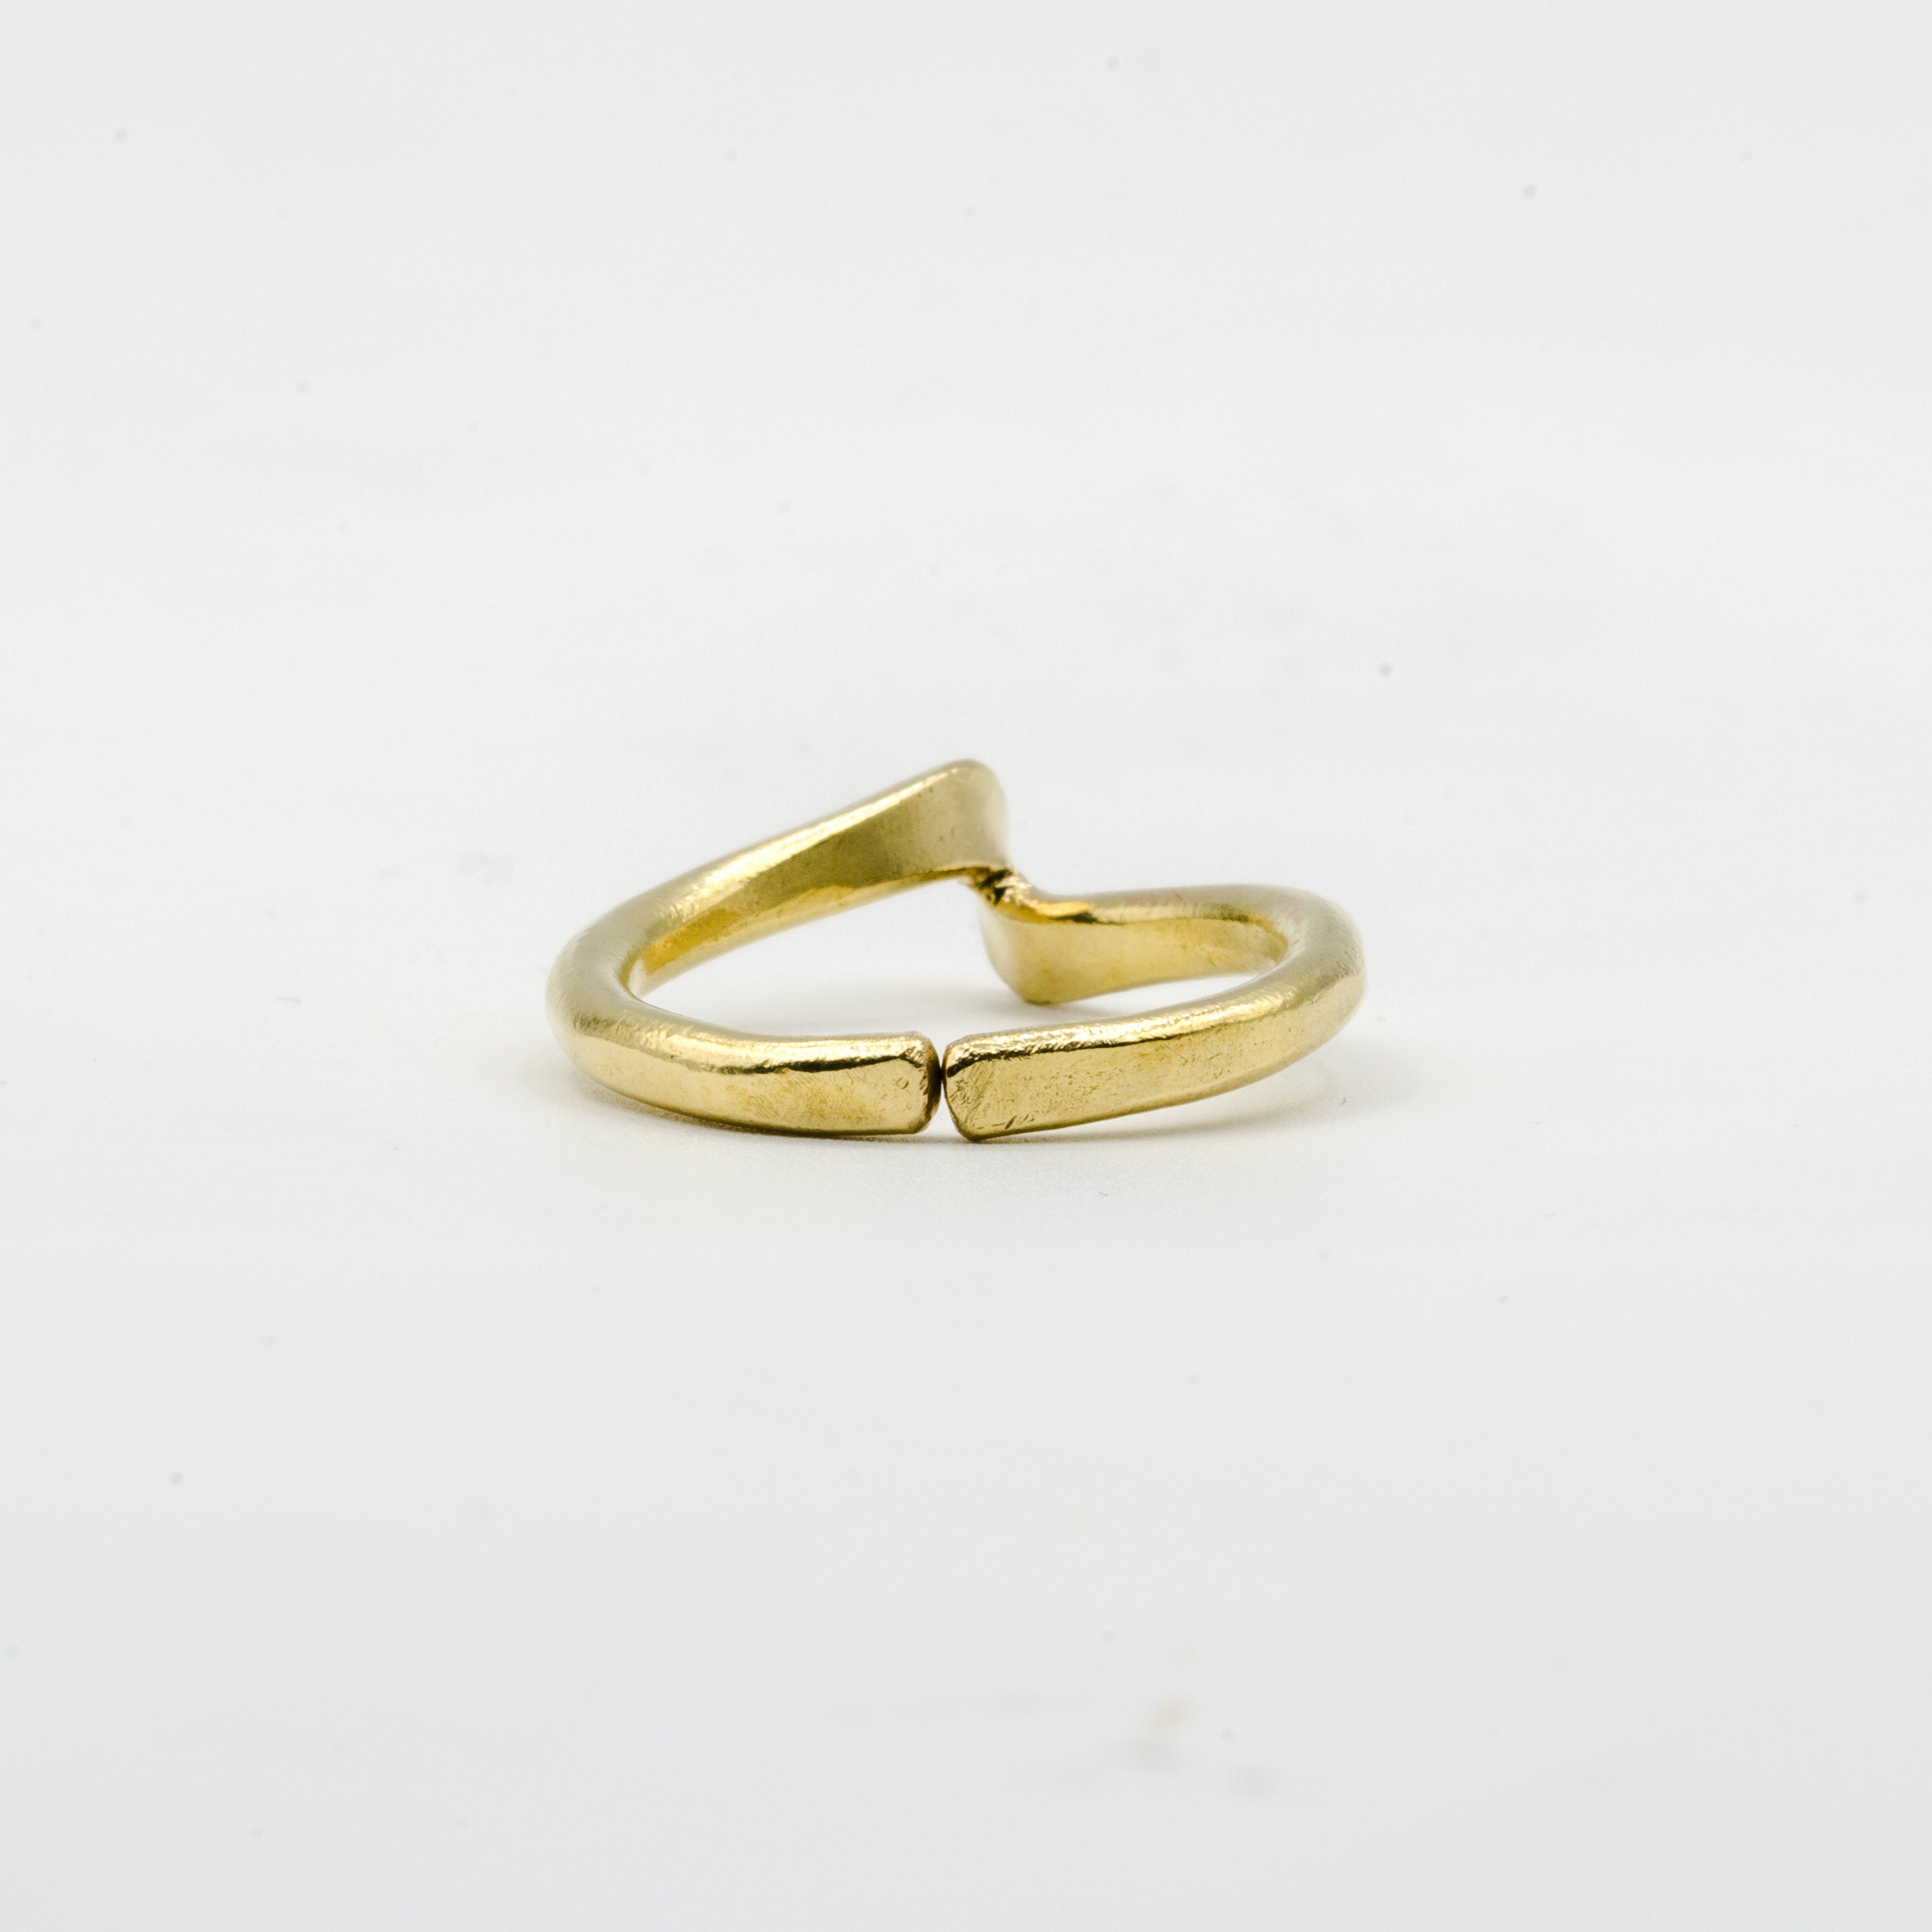 back view of hand forged curved brass ring on white background